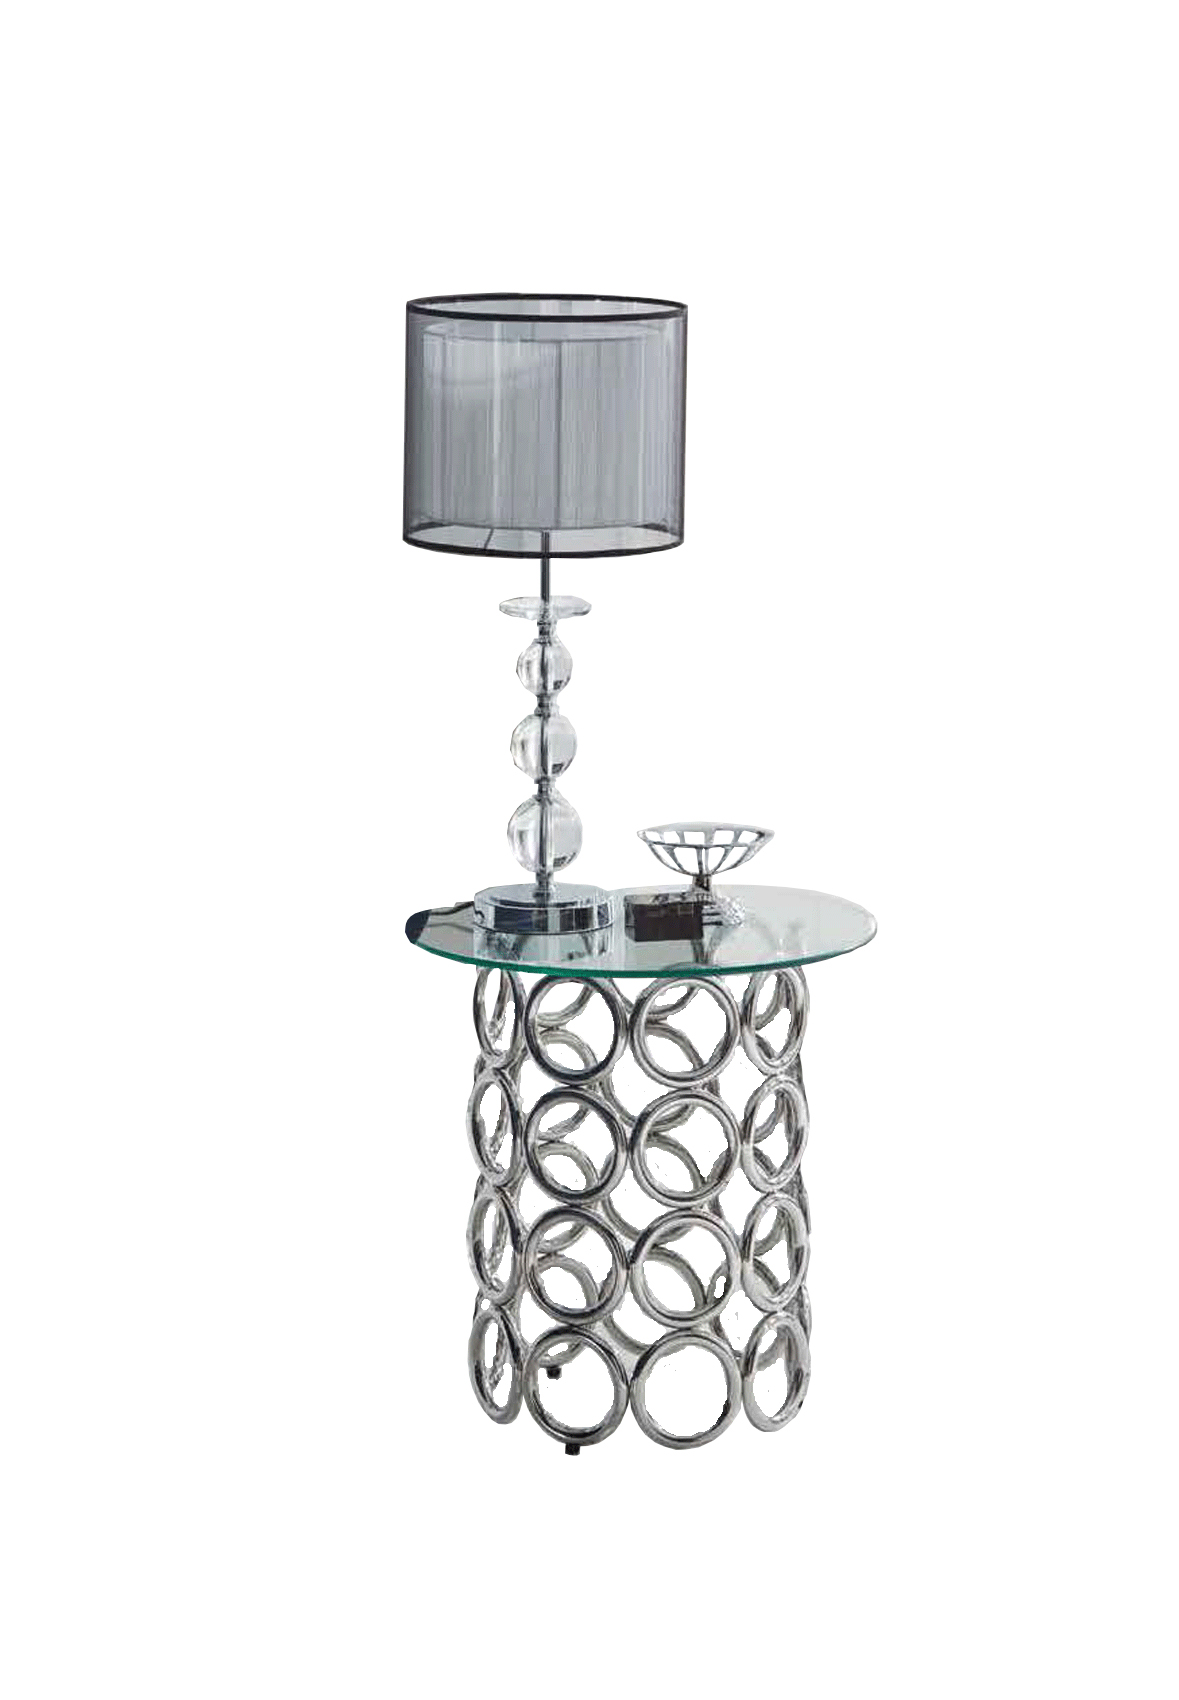 Brands SWH Classic Living Special Order CT-233 Coffee table, TO-9123 Lamp Table